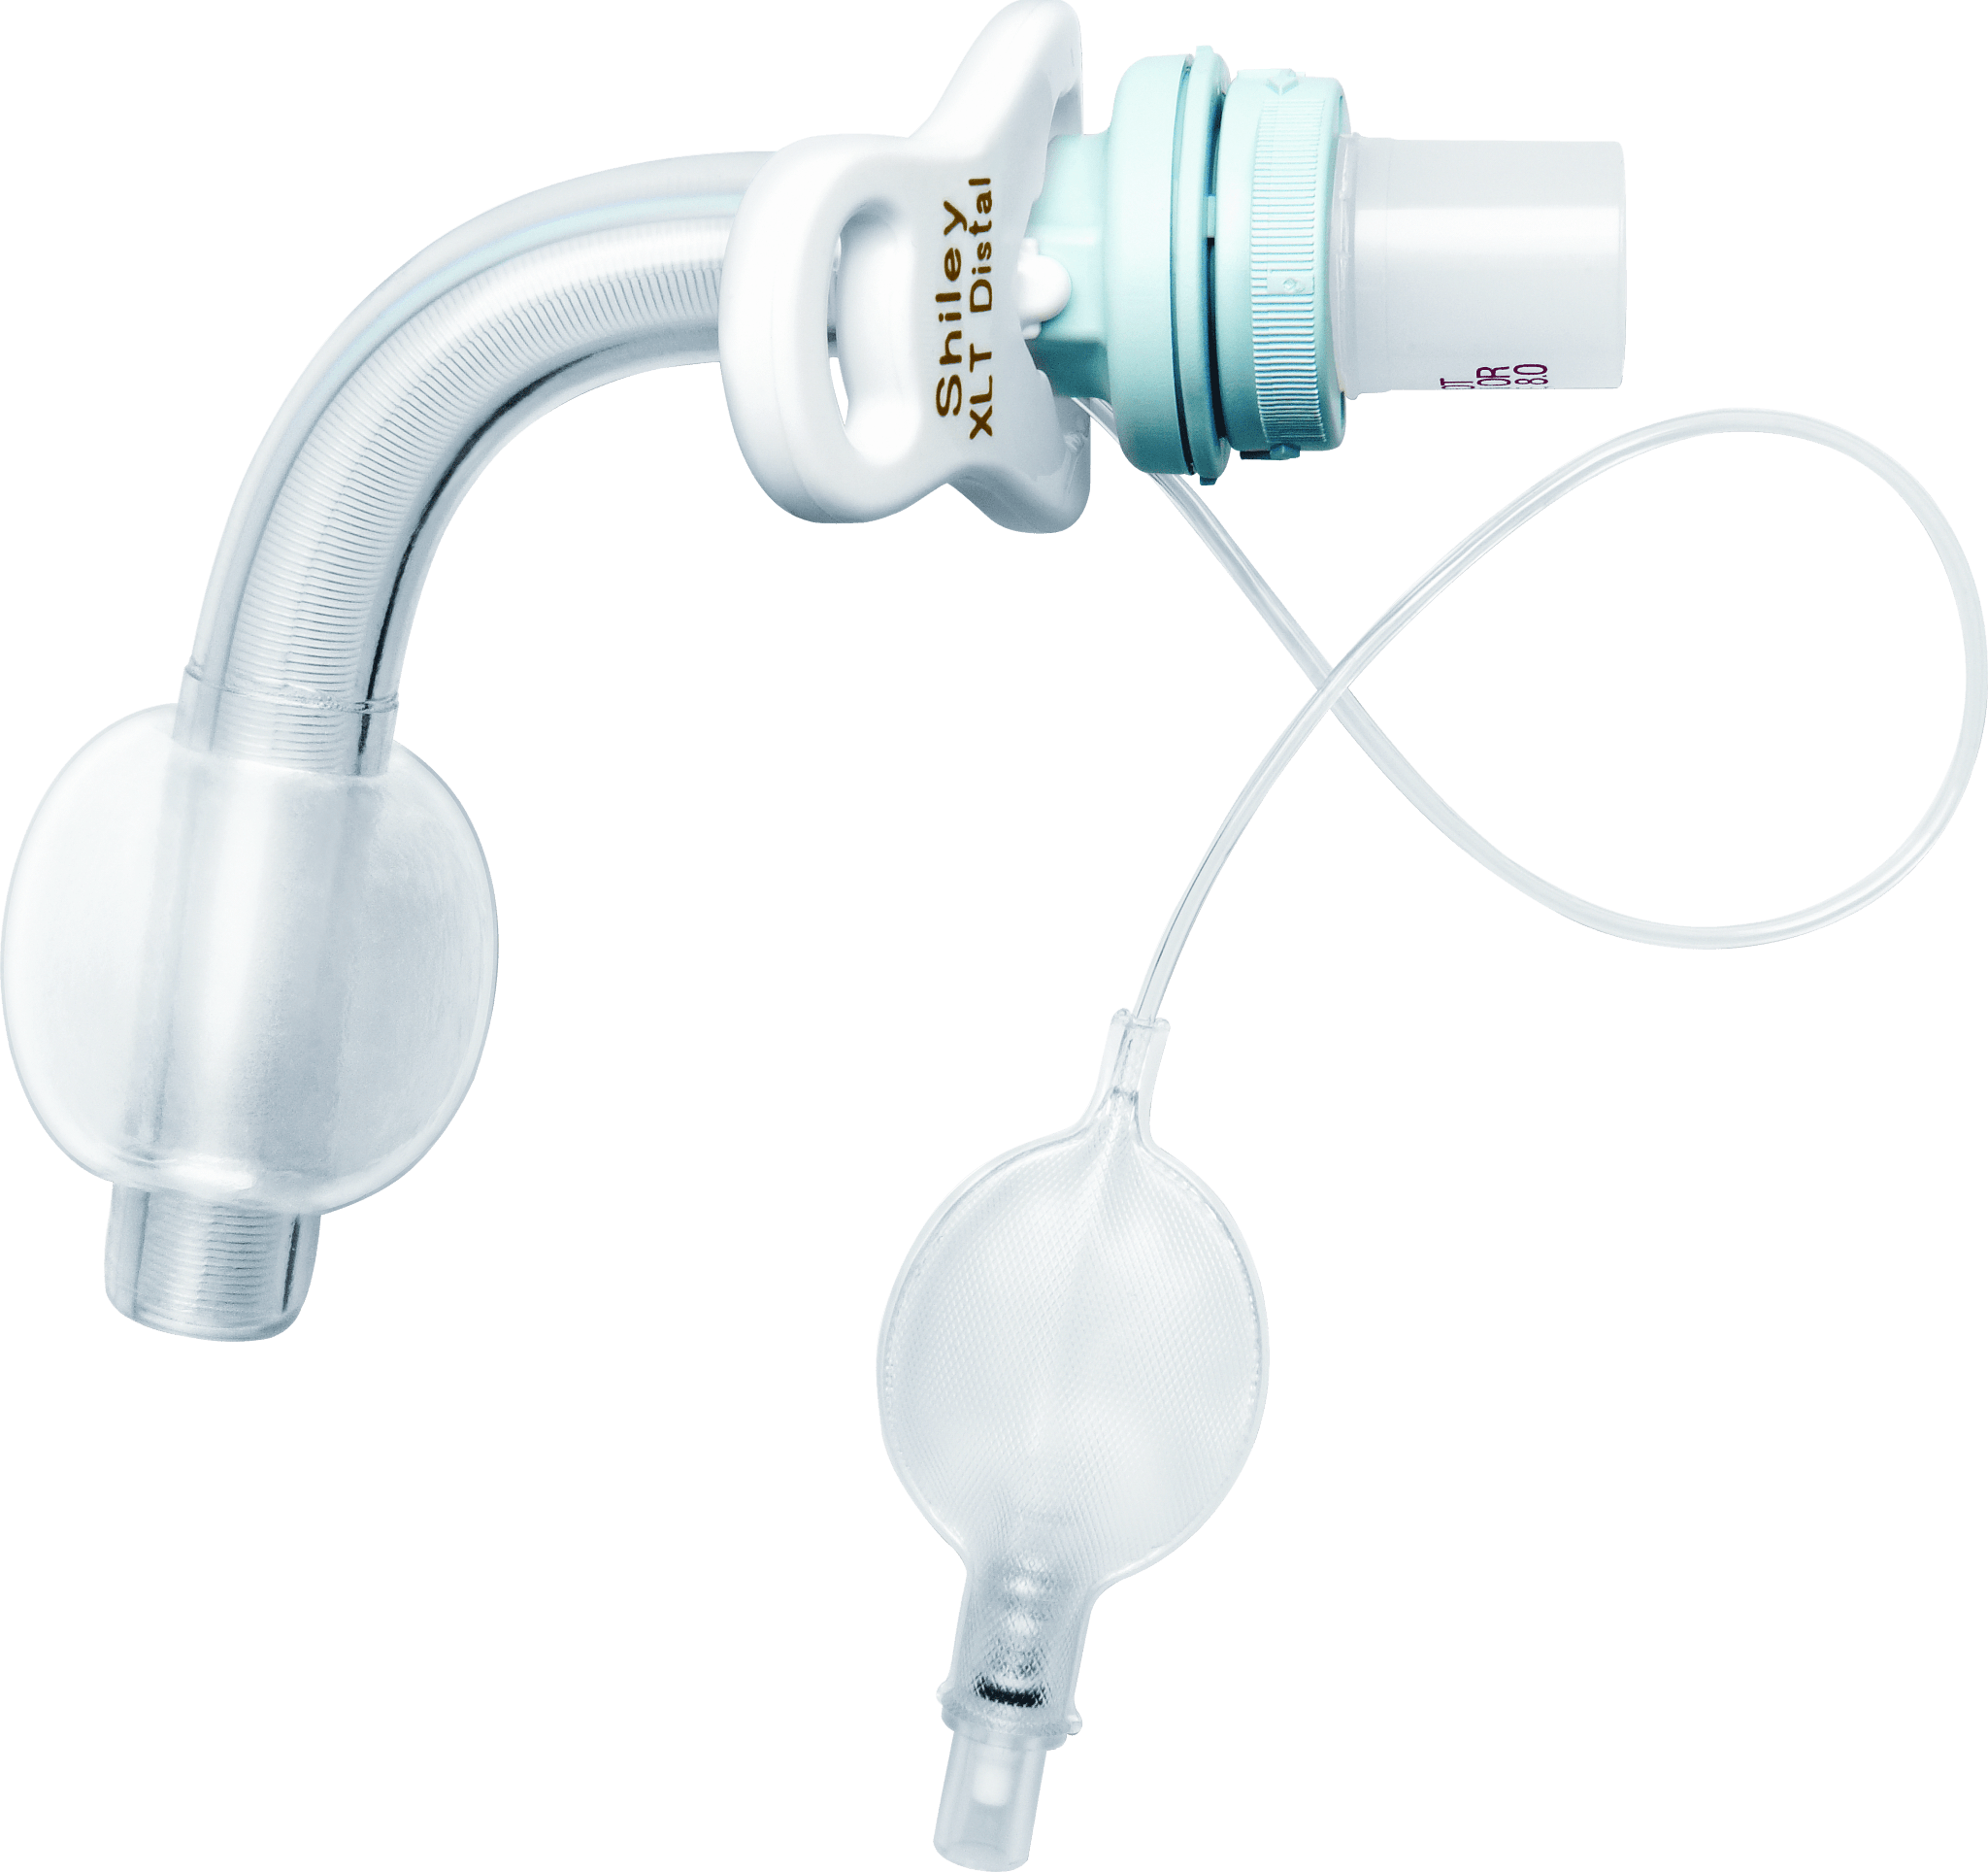 EA/1 - Mallinckrodt Medical Inc Shiley™ XLT Extended-Length Cuffed Tracheostomy Tube 95mm L, 6mm I.D. x 11mm O.D., Distal Extension, White Flange - Best Buy Medical Supplies